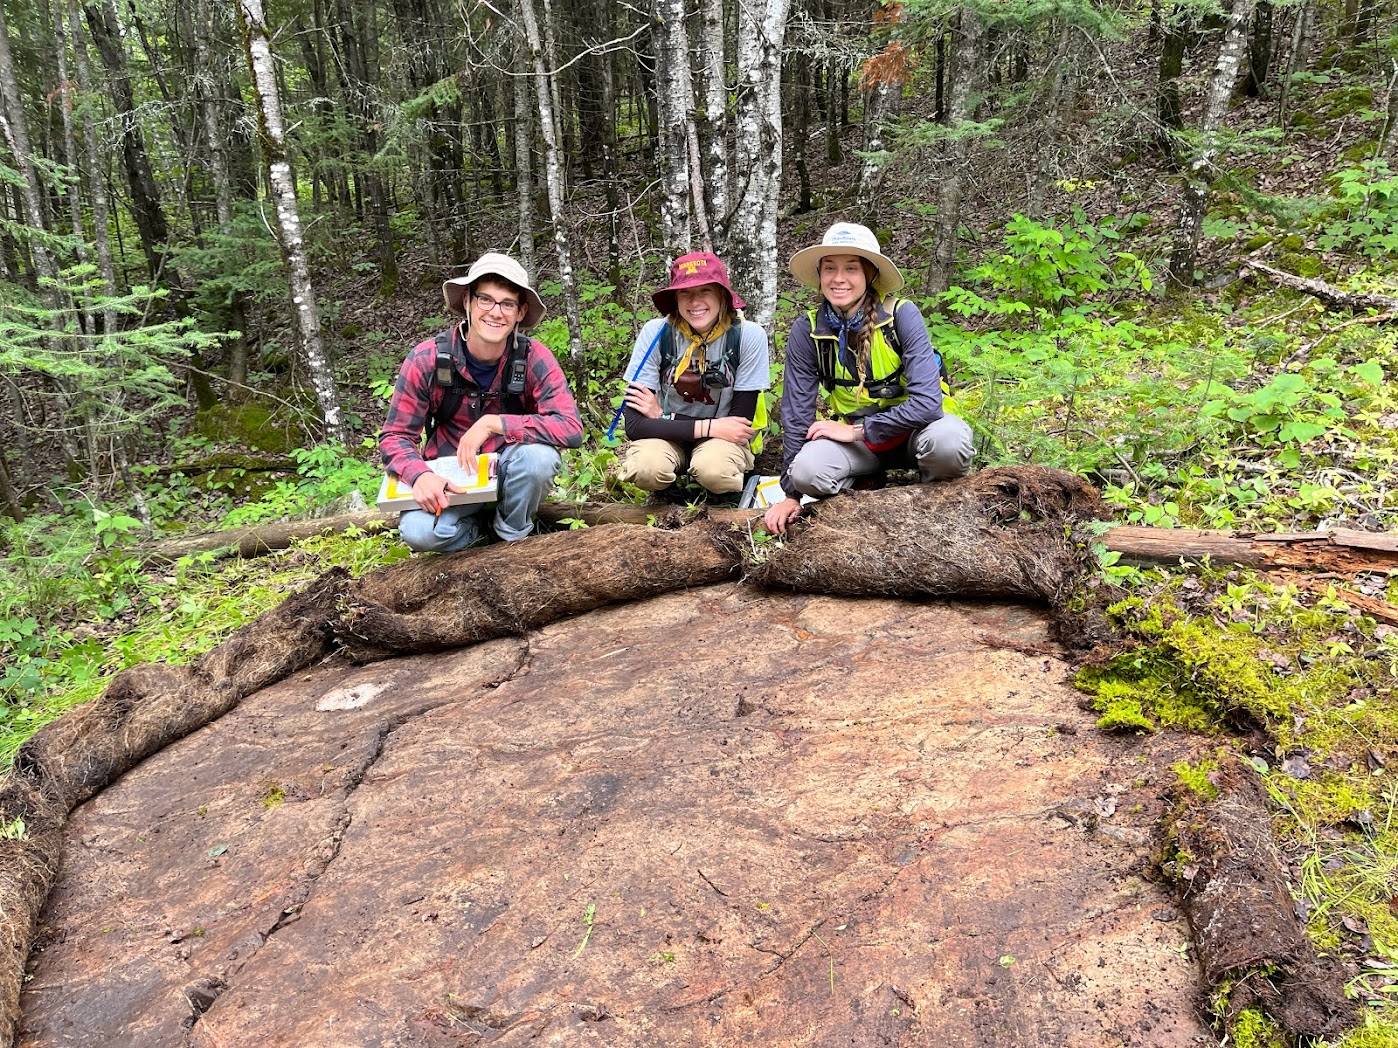 Three people crouch smiling on far side of a rock outcrop